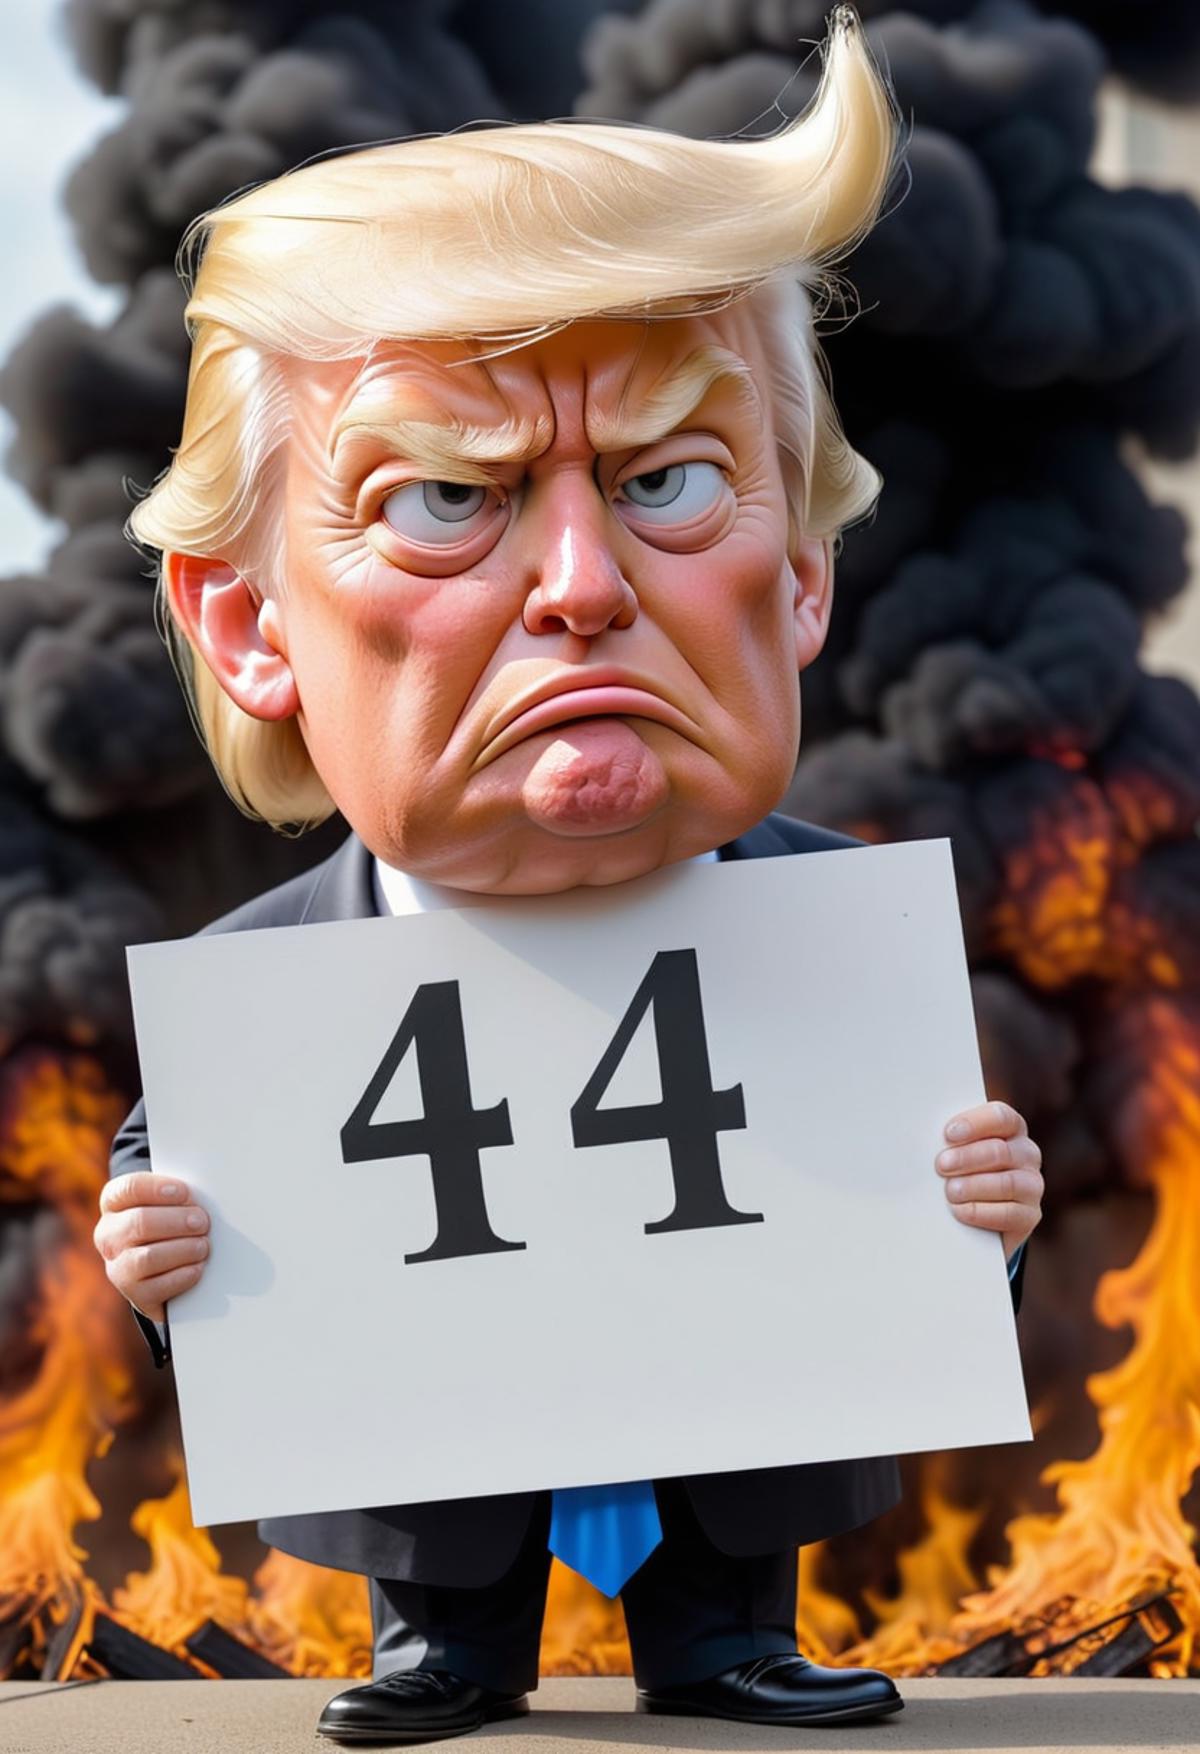 Cartoon Trump Holding a 44 Sign and Making a Funny Frown Face.